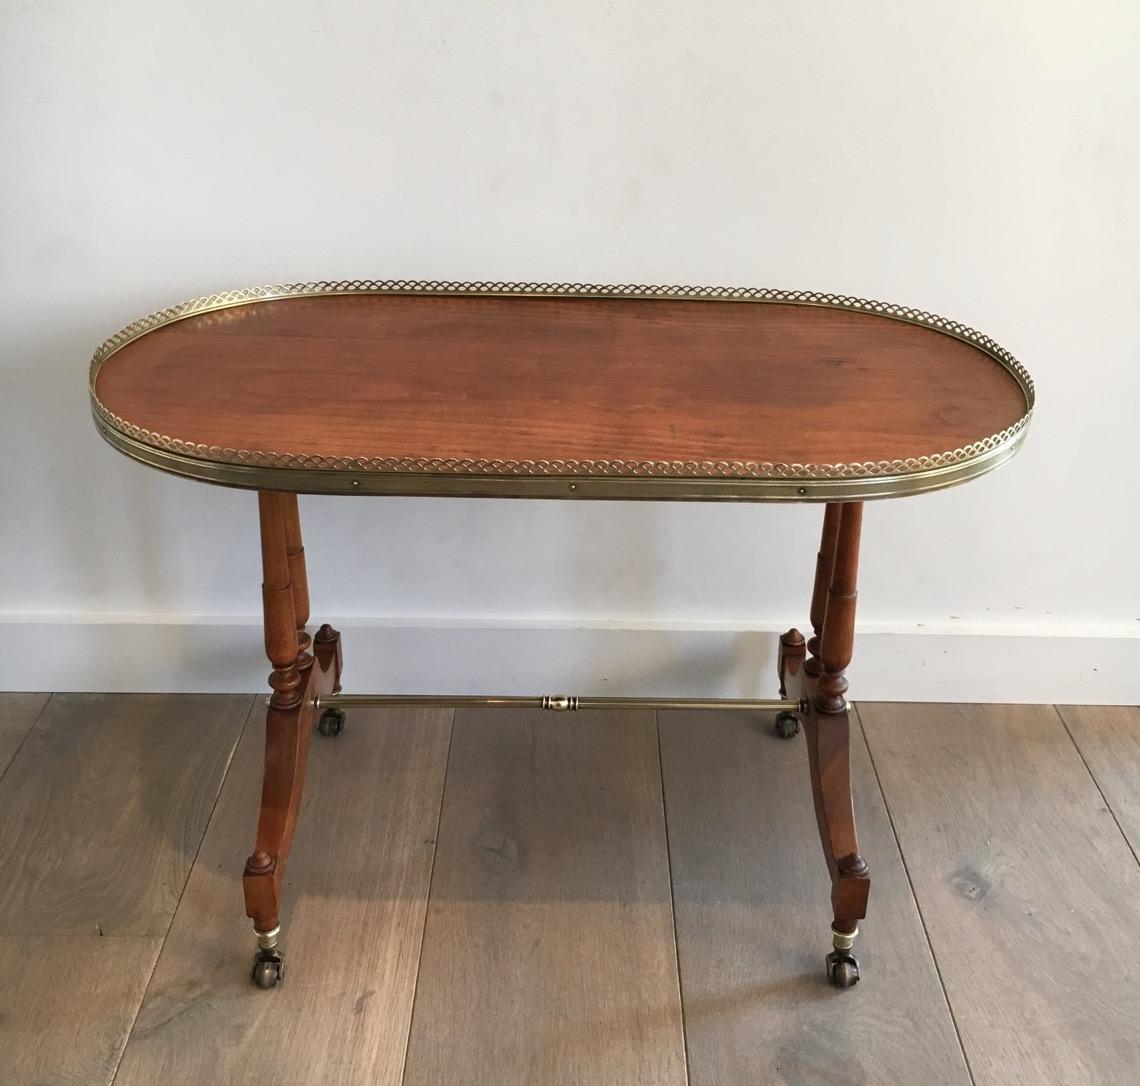 This neoclassical oval coffee table is made of cherrywood. The top of the table is surrounded by a nice brass gallery. The cocktail table also has a nice brass stretcher as well as brass casters. This is a French work, circa 1940.